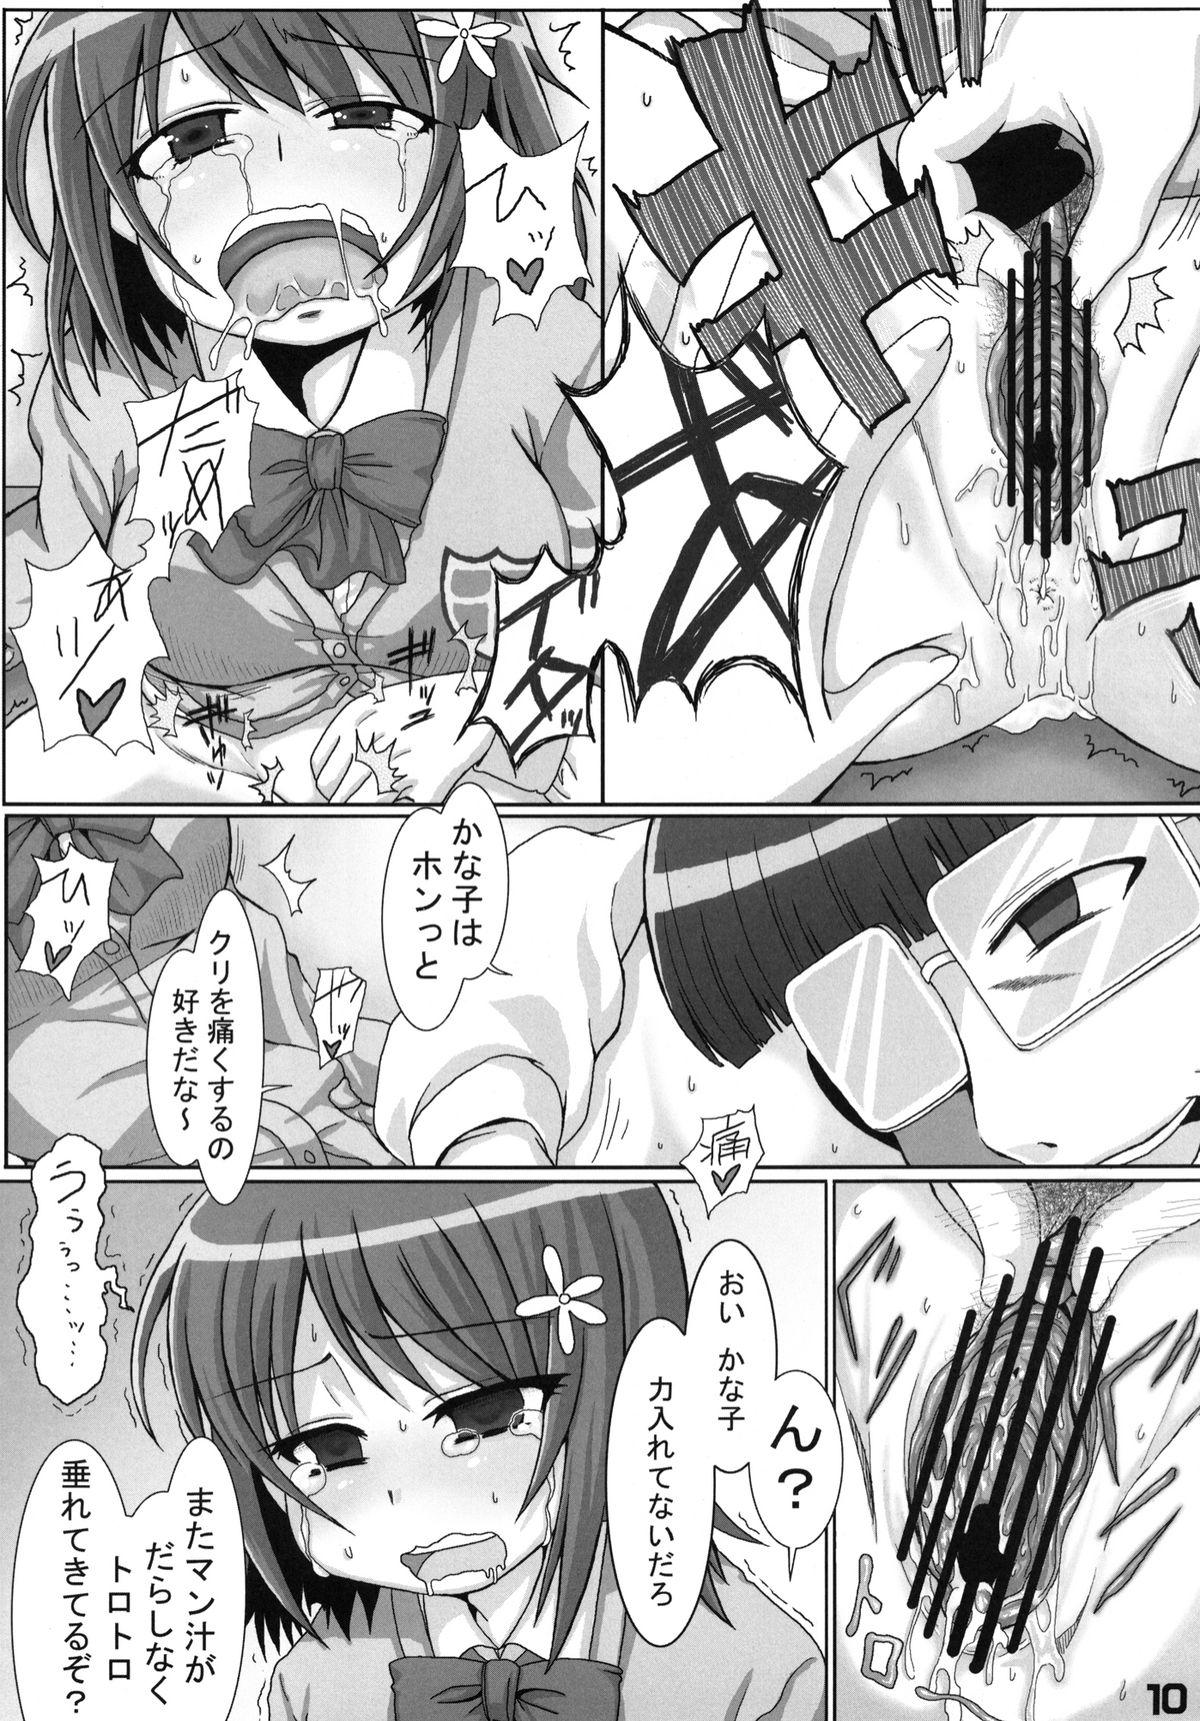 Sharing P to Kanako no Love Love Diet - The idolmaster Jerking Off - Page 9